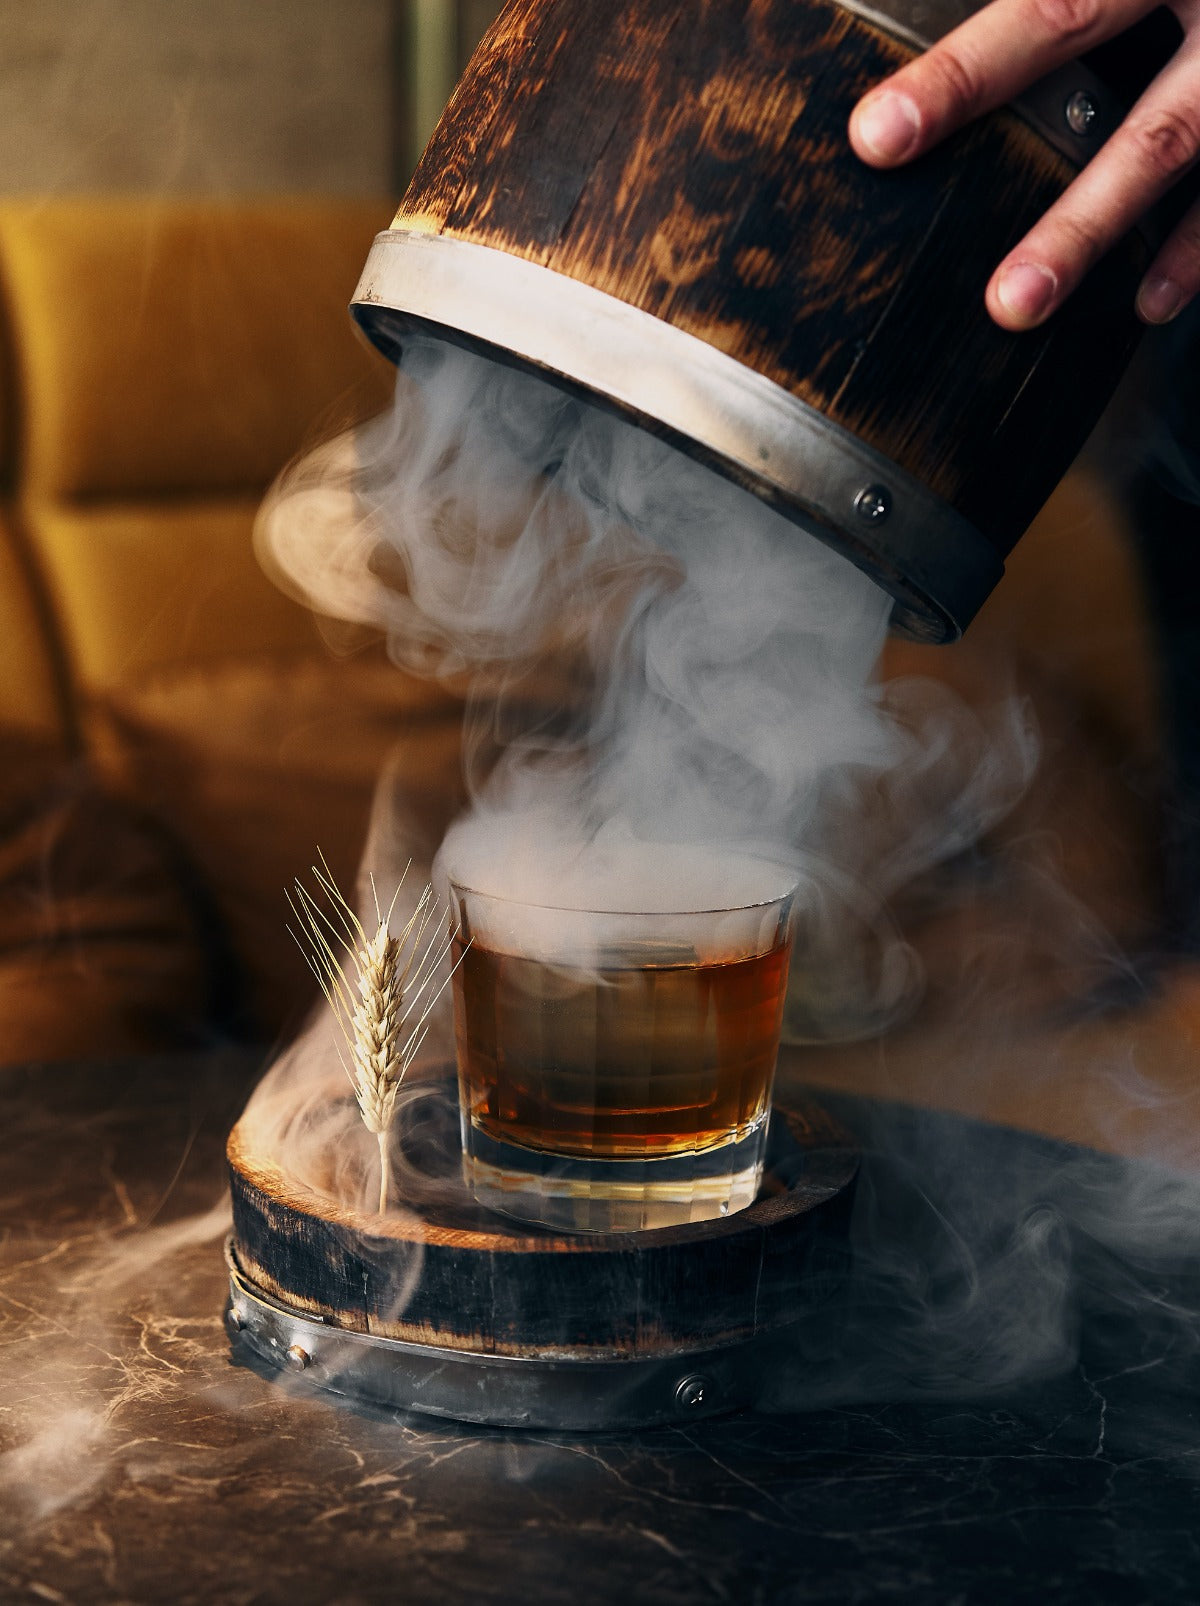 Asked And Answered: The Art of Whiskey Tasting